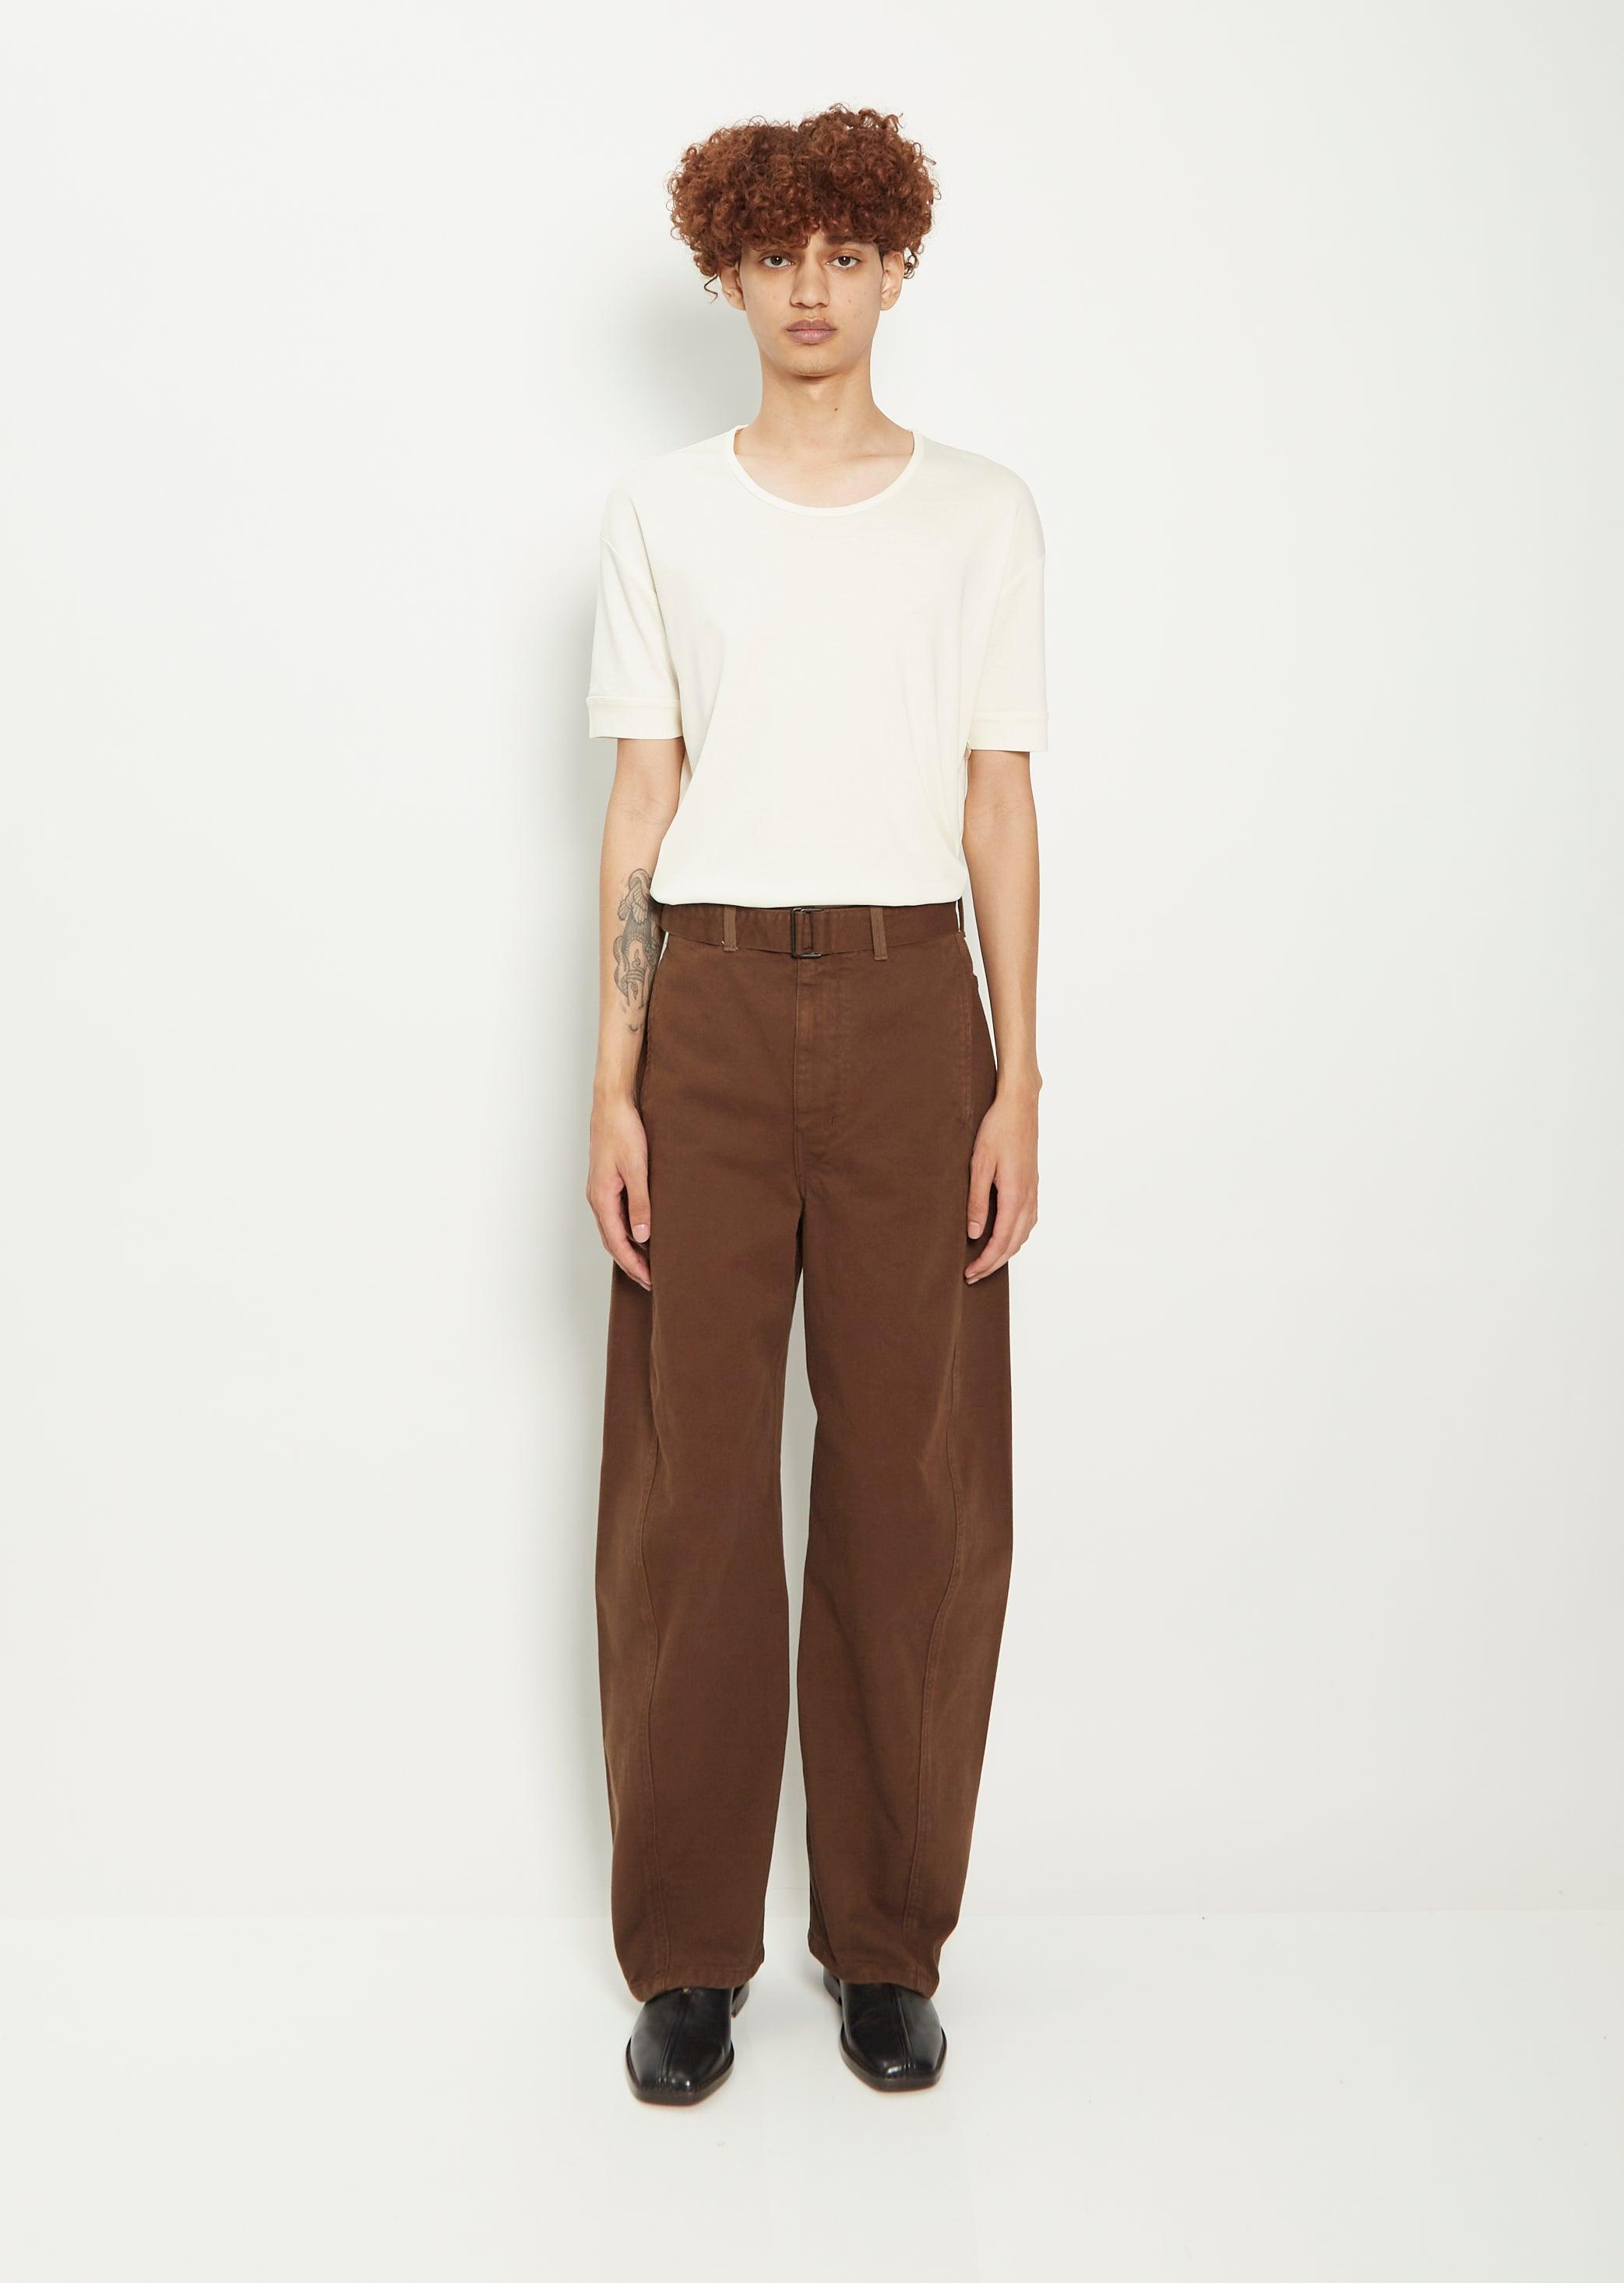 Lemaire Unisex Twisted Belted Cotton Pants - Dark Brown | Lyst